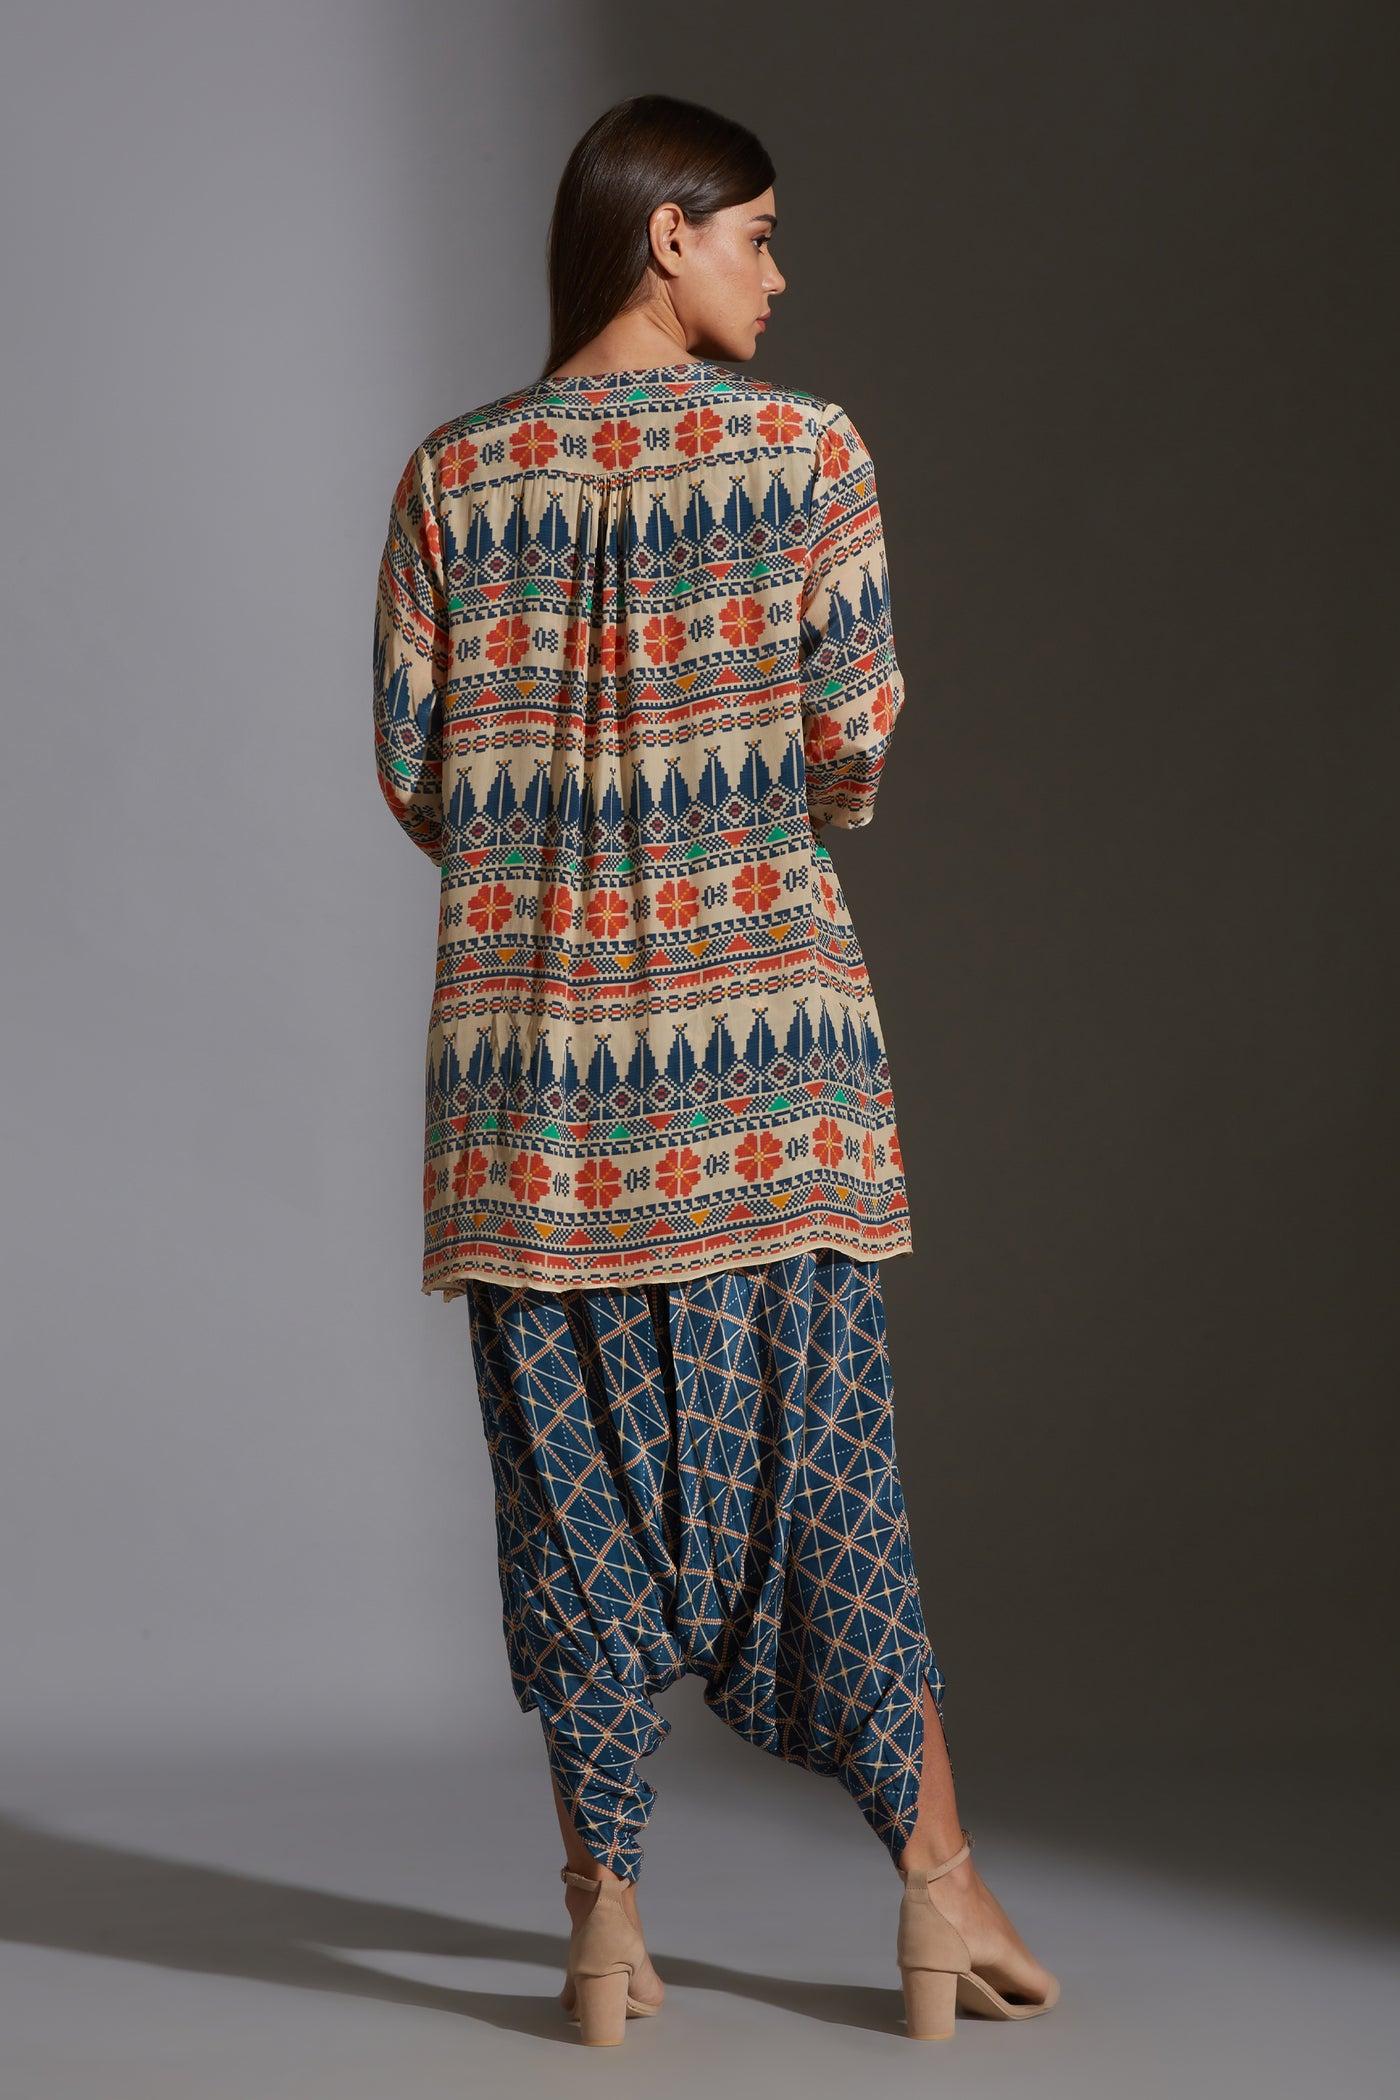 sougat paul Printed dhoti jumpsuit paired with printed jacket and tassel details multicolor festive fusion indian designer wear online shopping melange singapore